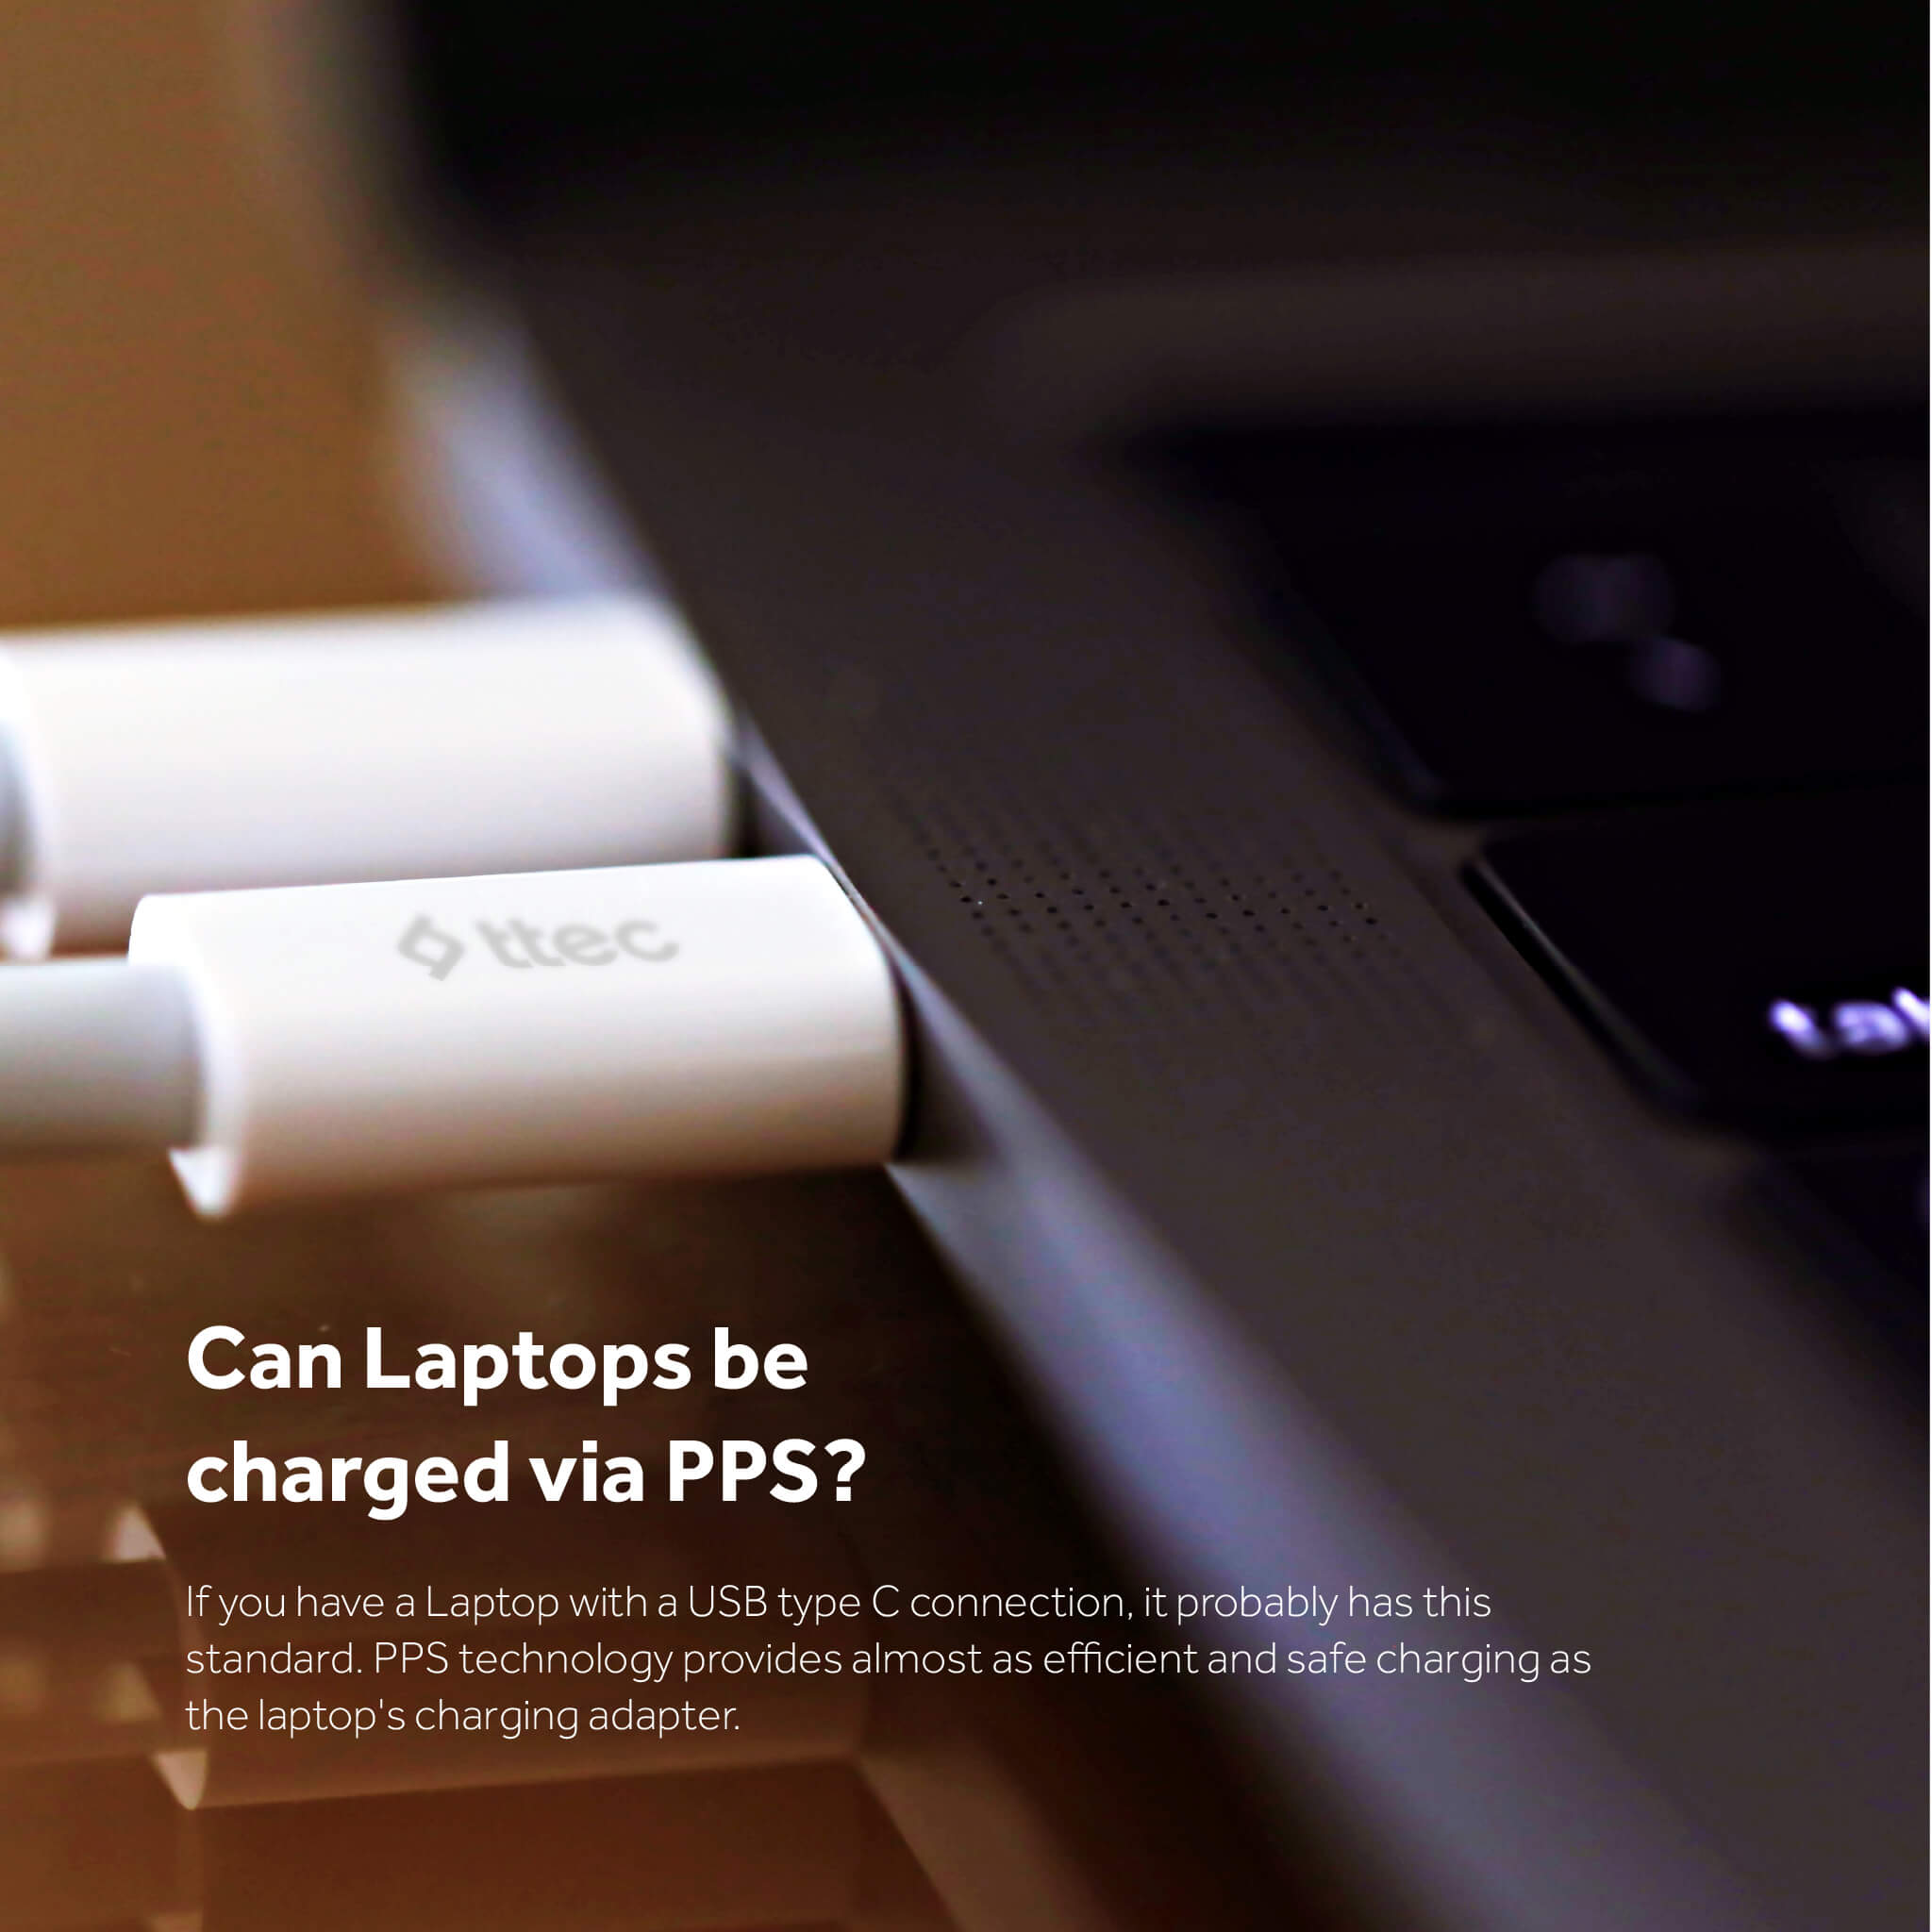 Can laptops be charged via pps